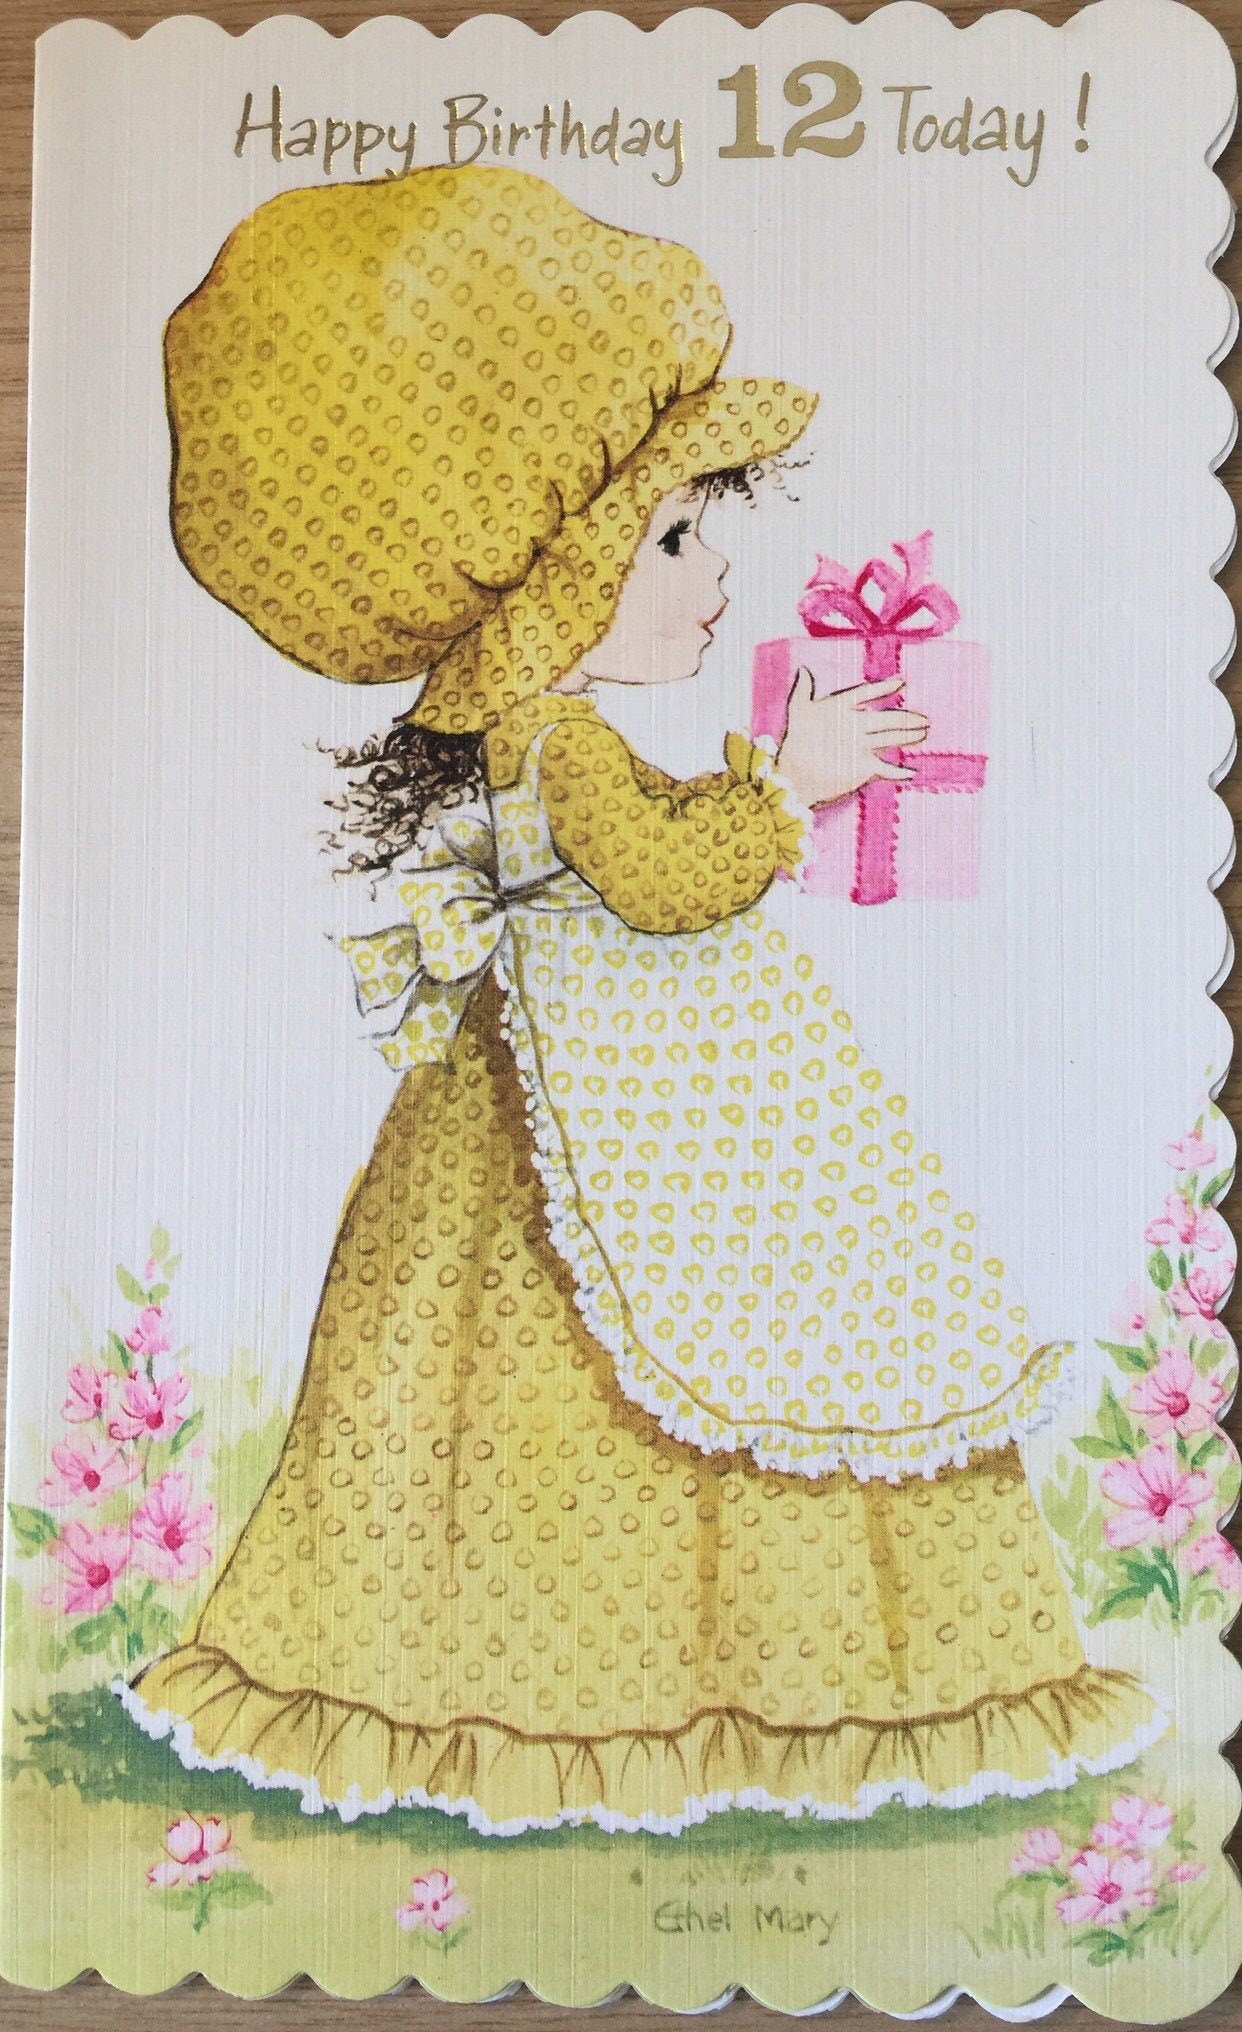 RARE Circa 1970s Vintage/Retro 'A Special Wish On Mother’s Day' Card Cute Little Holly Hobbie Style Girls Design Sweet Card Cute Verse